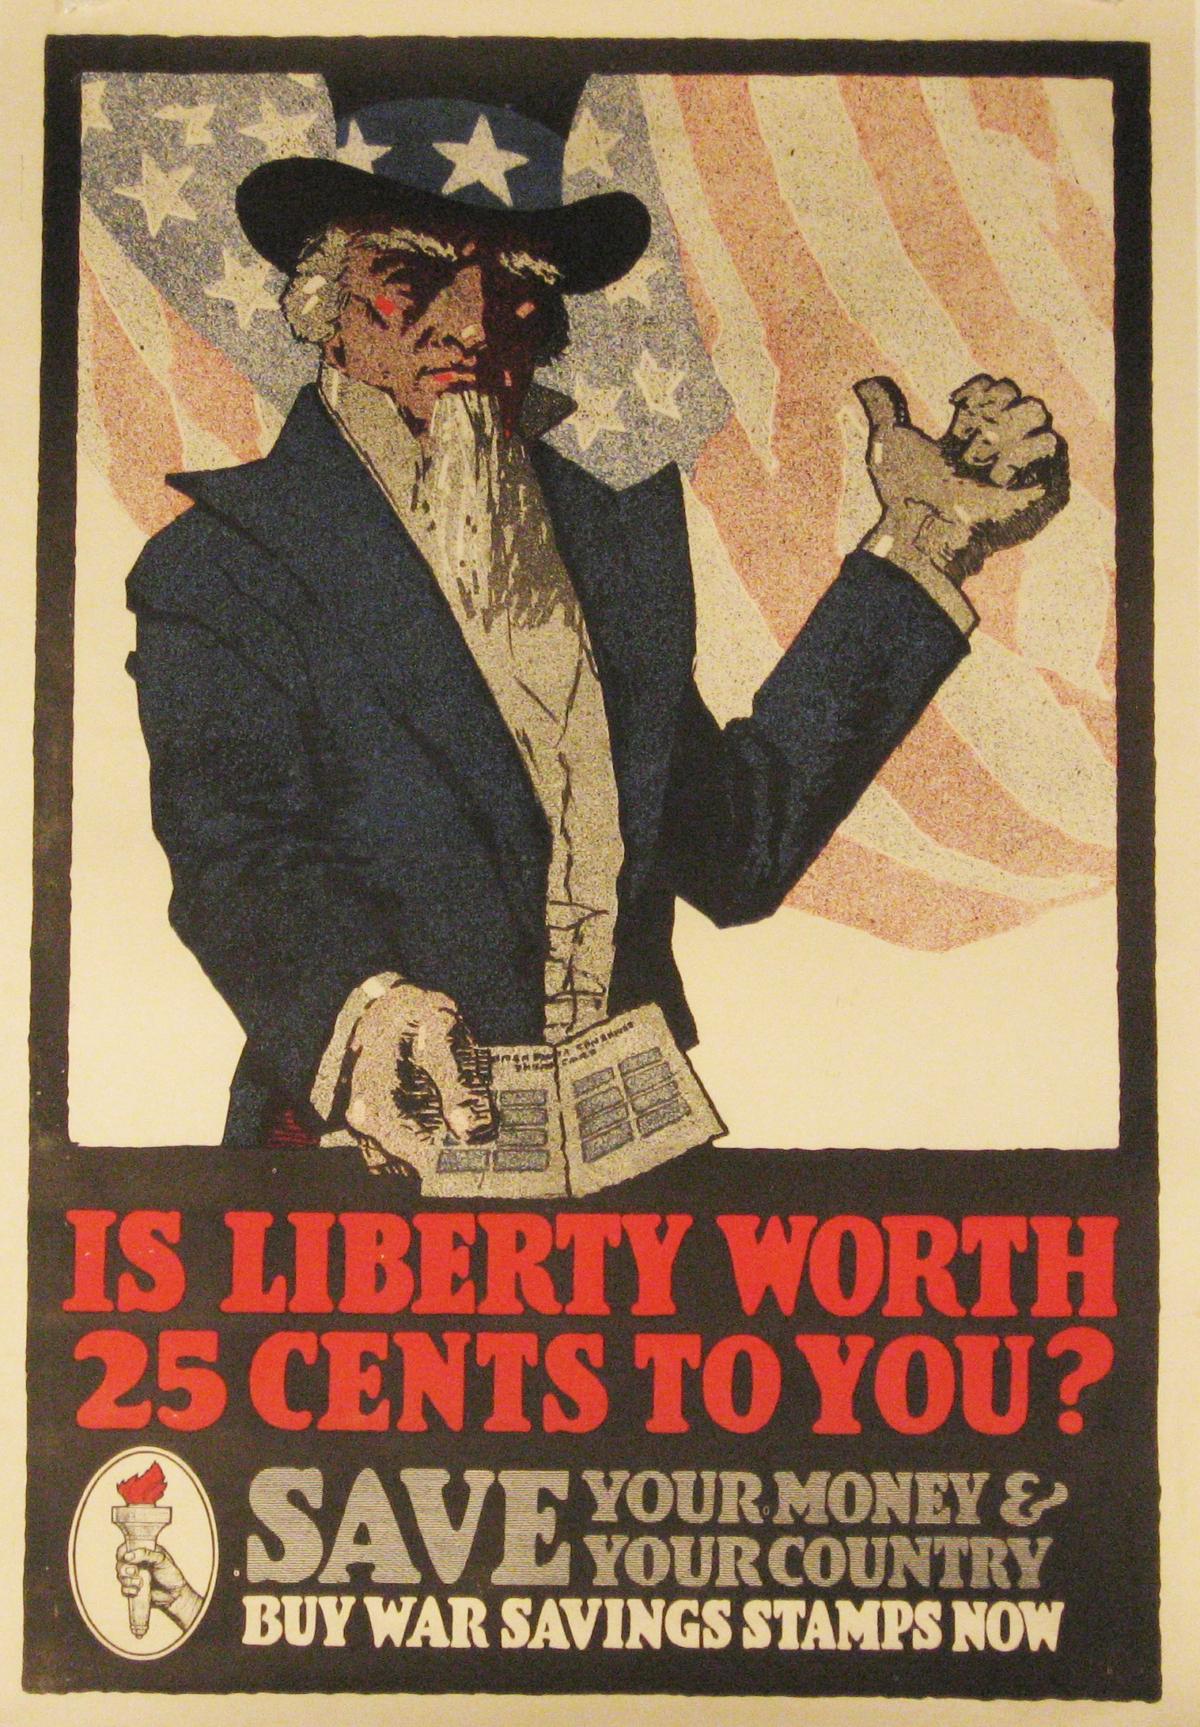 Artist: Unknown

Date of Origin: circa 1917

Medium: Original Stone Lithograph Vintage Poster

Size: 24″ x 41”

 

Woodblock style poster for War Savings Stamps to help the United States war effort depicting the classic Uncle Sam. American one sheet